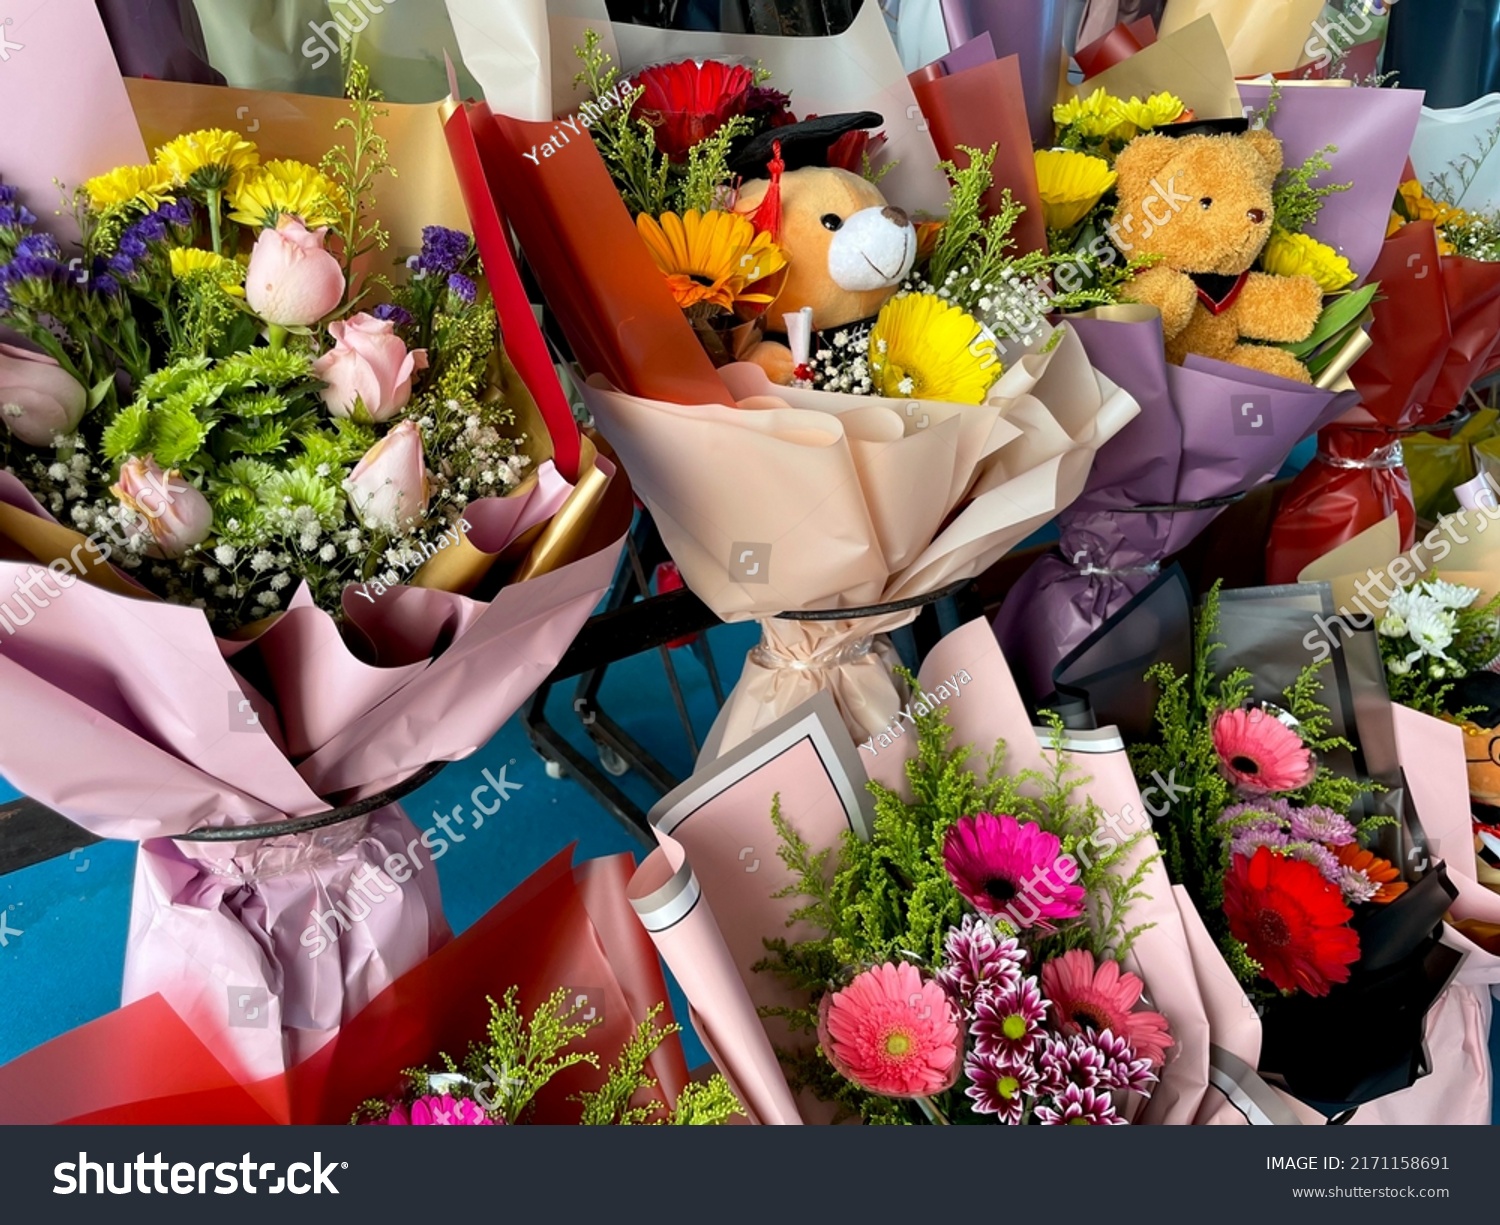 A gift shop sells flowers and hampers for parents and friends on graduation day as a gift. #2171158691